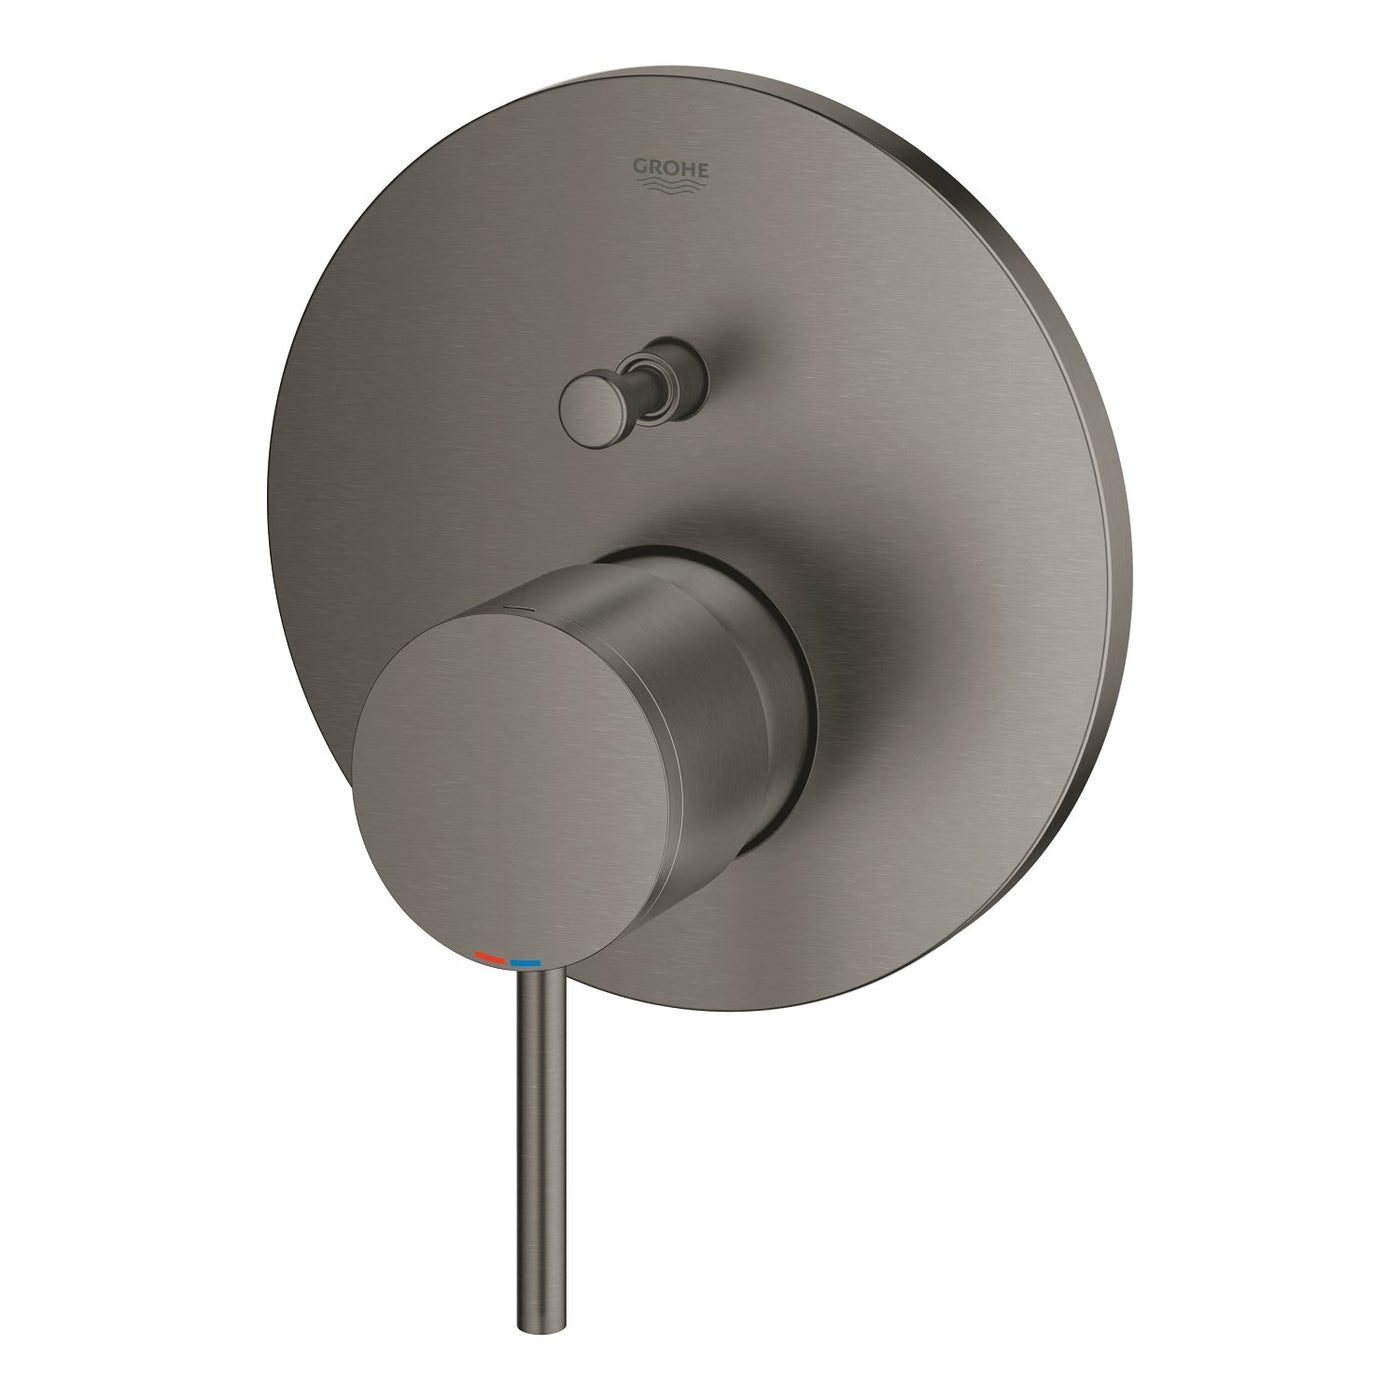 Grohe Brushed Hard Graphite Atrio Single-lever mixer with 2-way diverter - Letta London - Thermostatic Showers